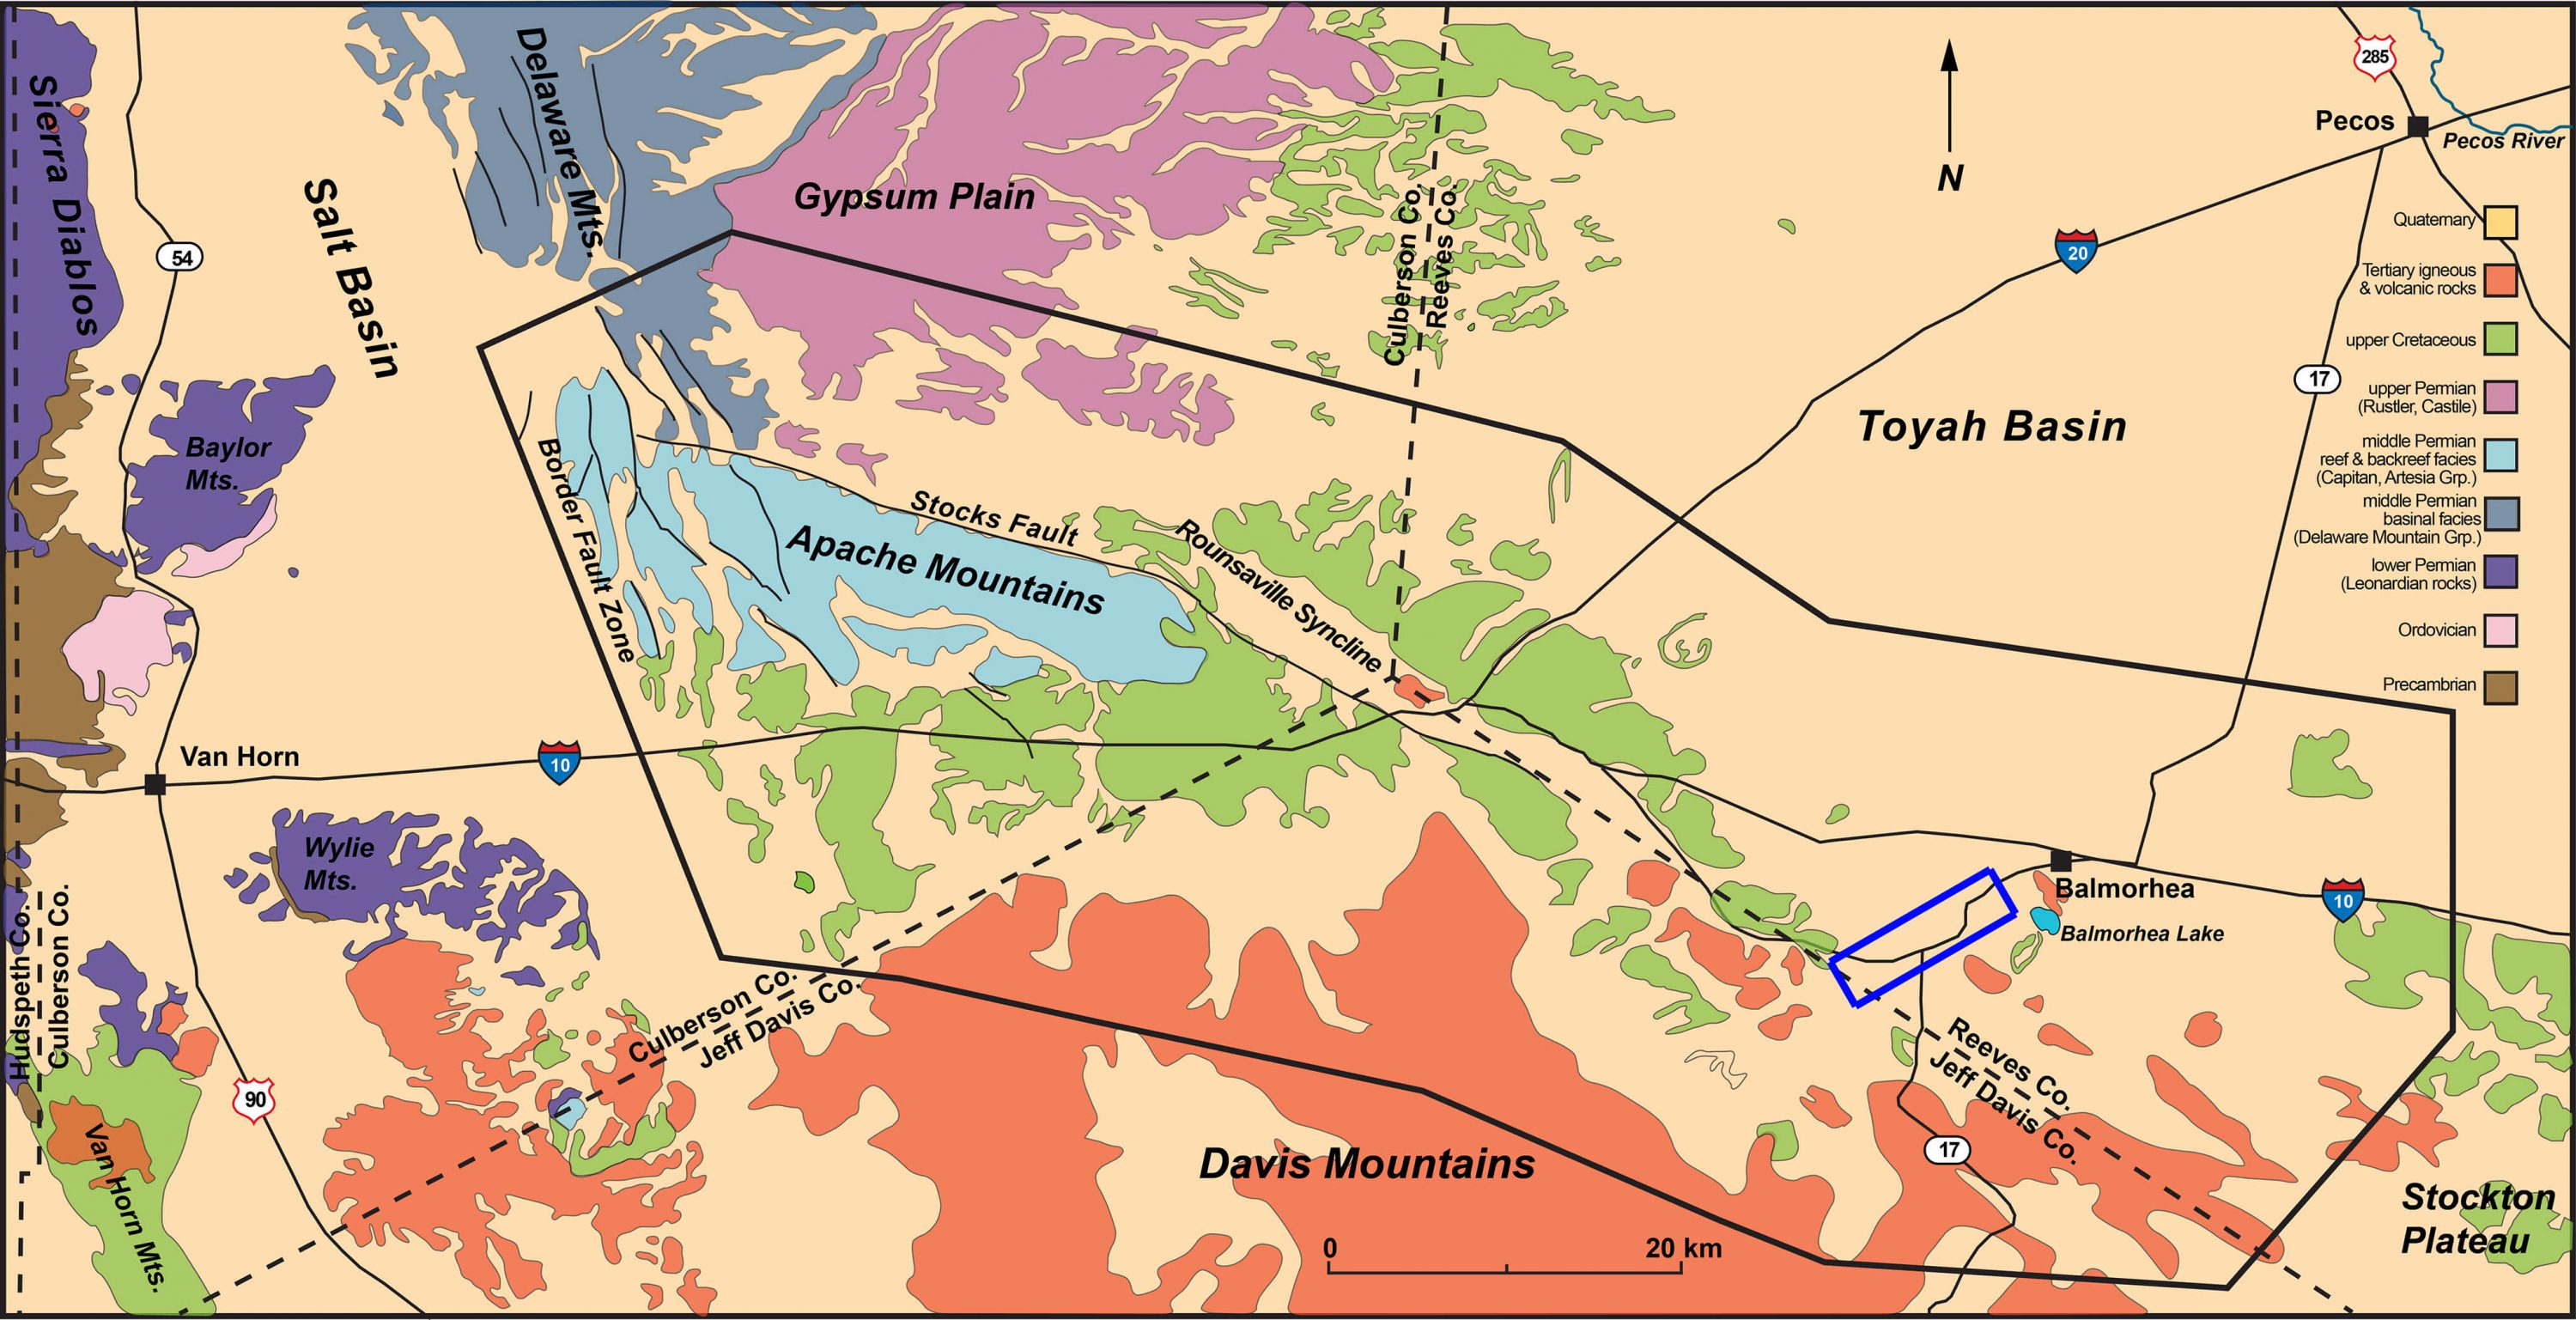 Geologic map of the Pecos-Van Horn region ofWest Texas showing the proposed study area with marks identifying where the San Solomon Springs Group was.